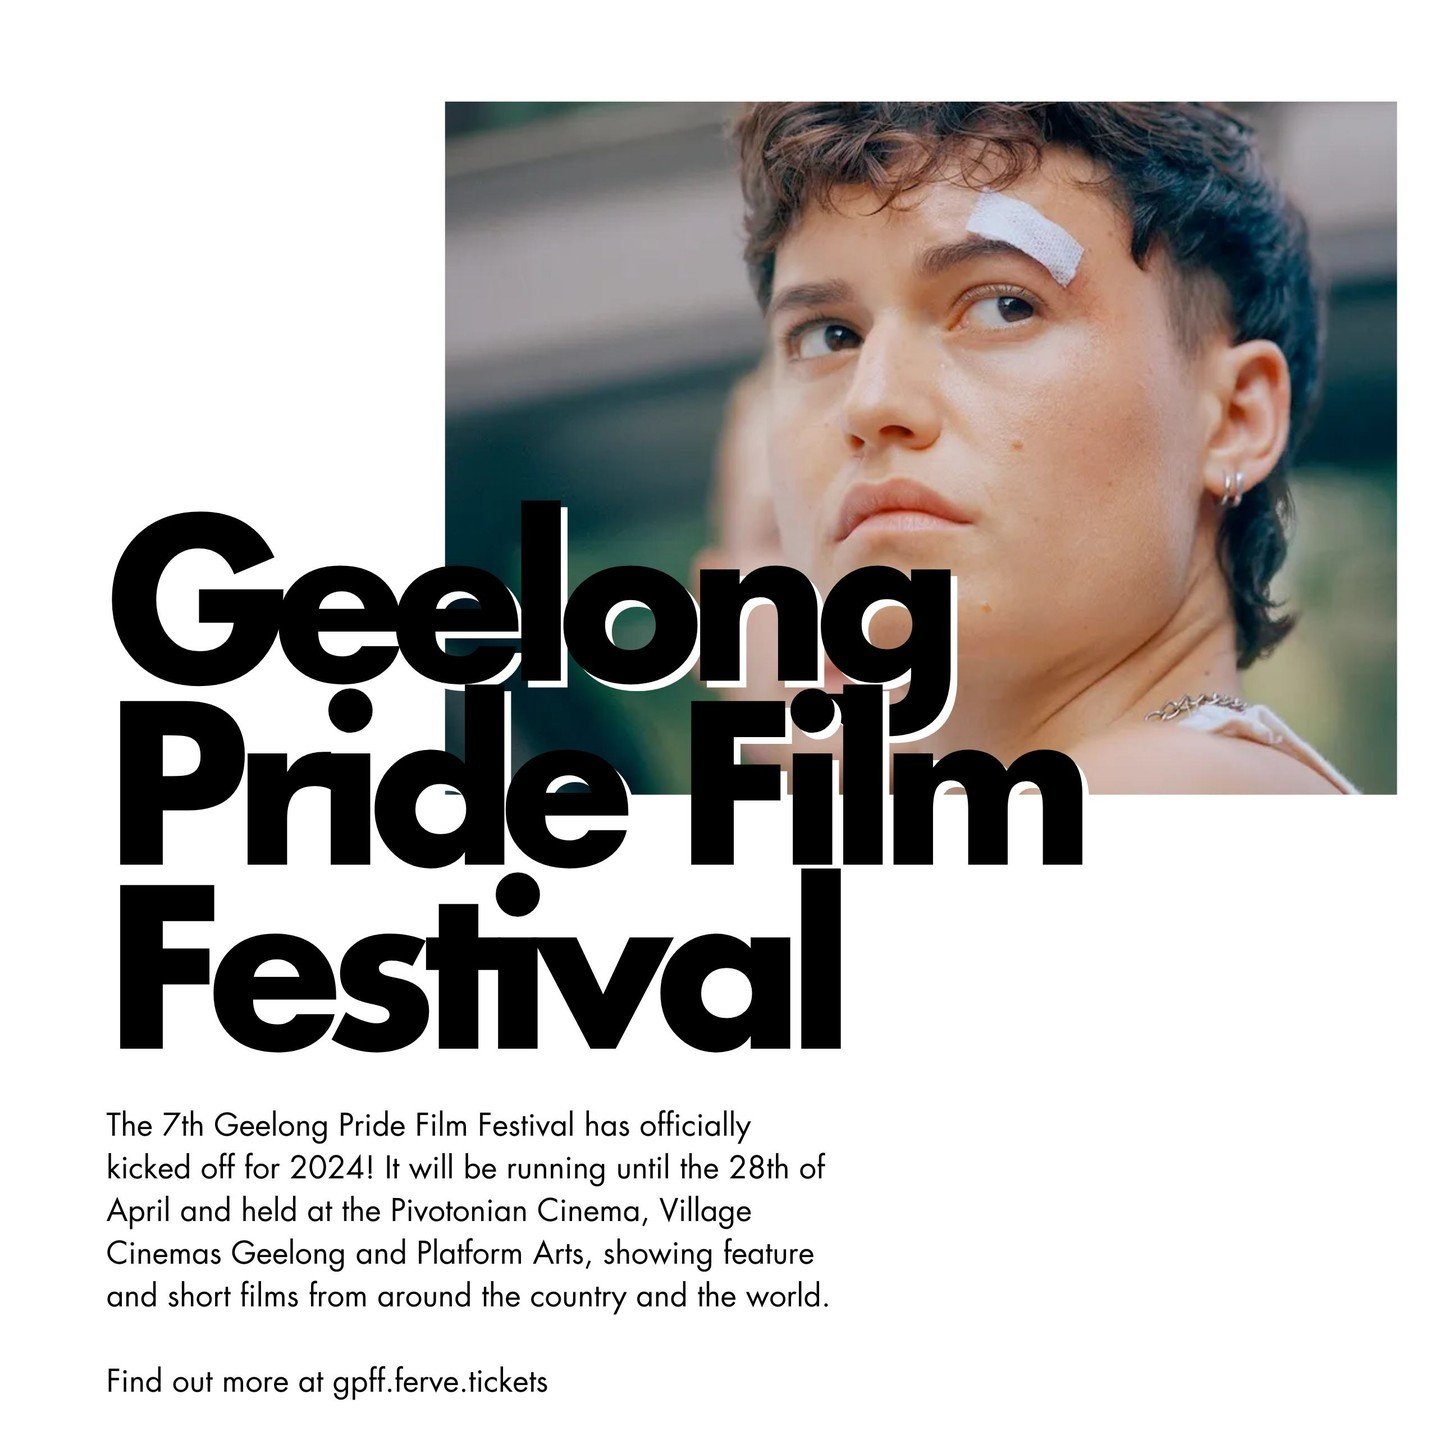 This one goes out to our Victorians; The Geelong Pride Film Festival officially kicked off on Thursday!
It will be running until the 28th of April at multiple locations in Geelong, and screening both feature and short films. 

You can find out more a